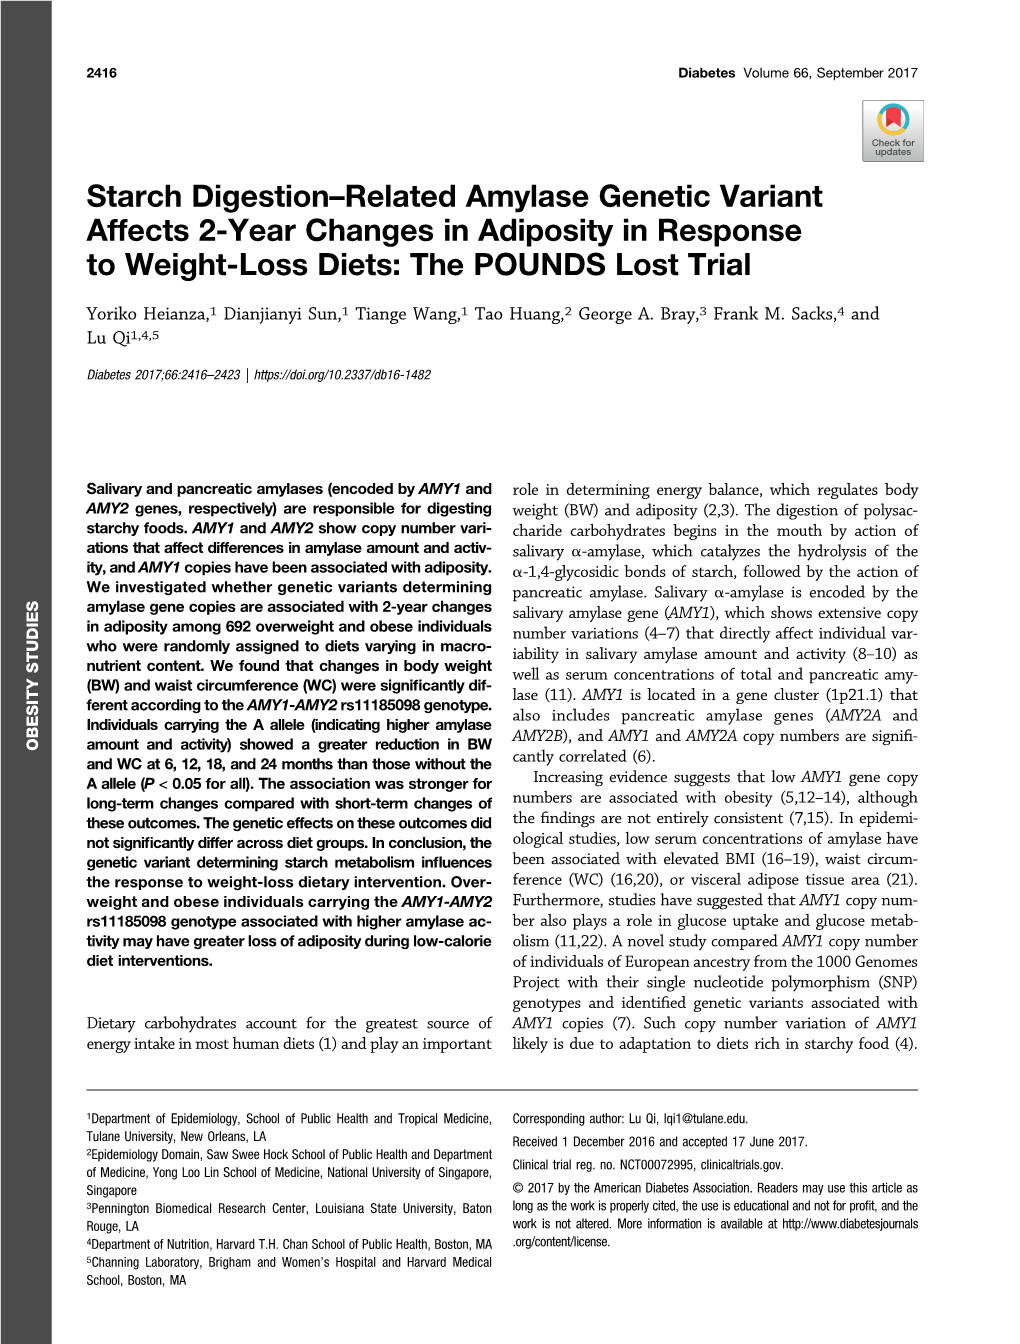 Starch Digestion–Related Amylase Genetic Variant Affects 2-Year Changes in Adiposity in Response to Weight-Loss Diets: the POUNDS Lost Trial